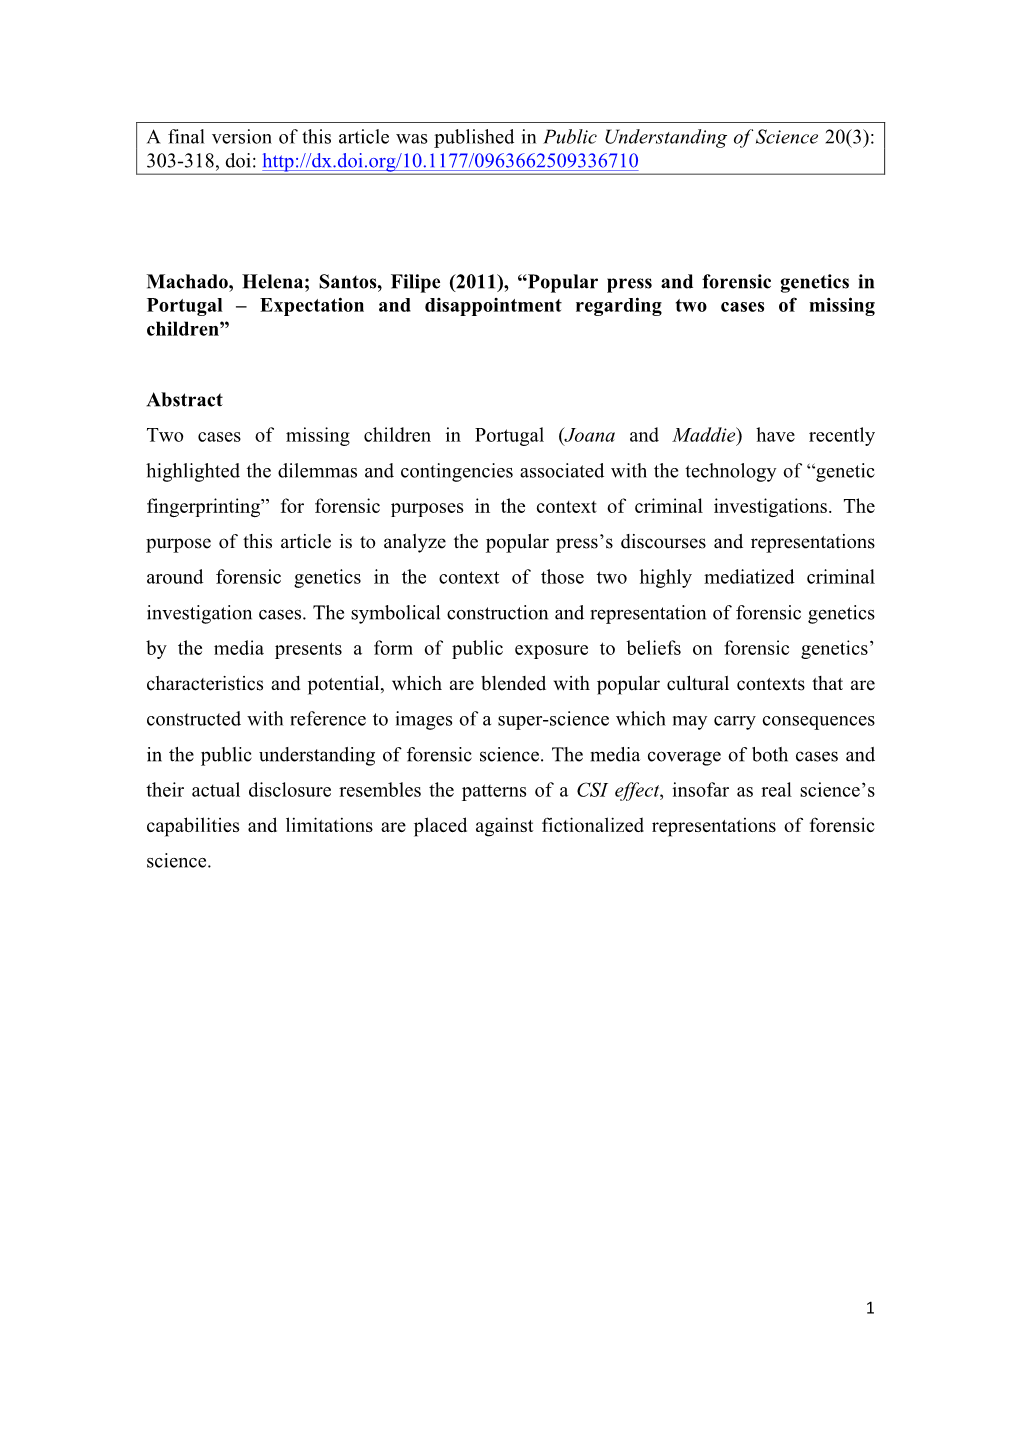 Popular Press and Forensic Genetics in Portugal.Pdf